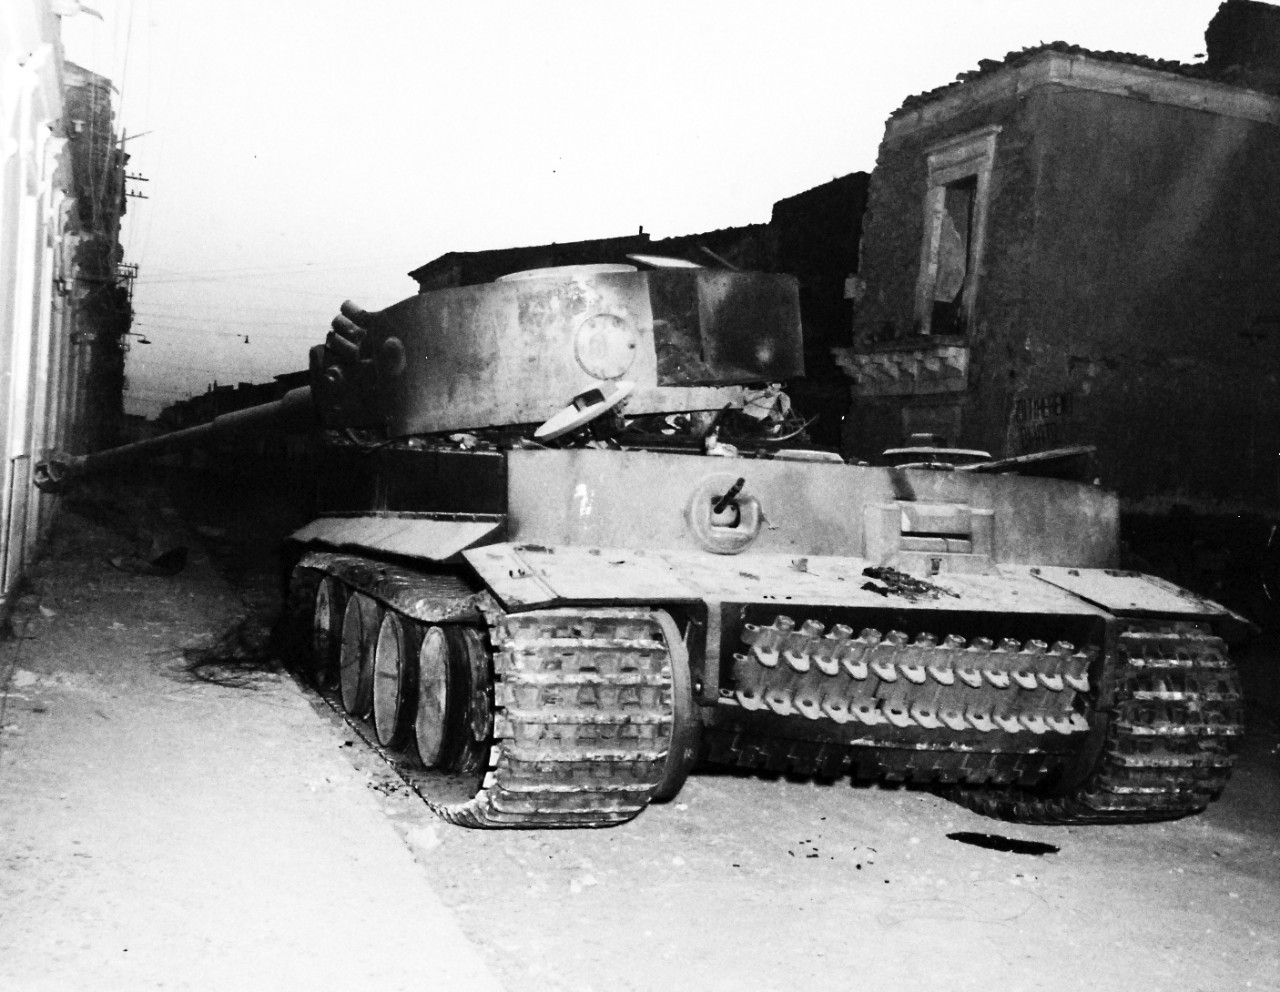 80-G-86222:  Operation Husky, July-August 1943.  Battle damage shown after successful landing operations by the Allies in the invasion of Sicily.  Note: Wreckage of German Mark VI tank at Biscari.     Photograph received July 14, 1943.      U.S. Navy Photograph, now in the collections of the National Archives.  (2017/01/17).